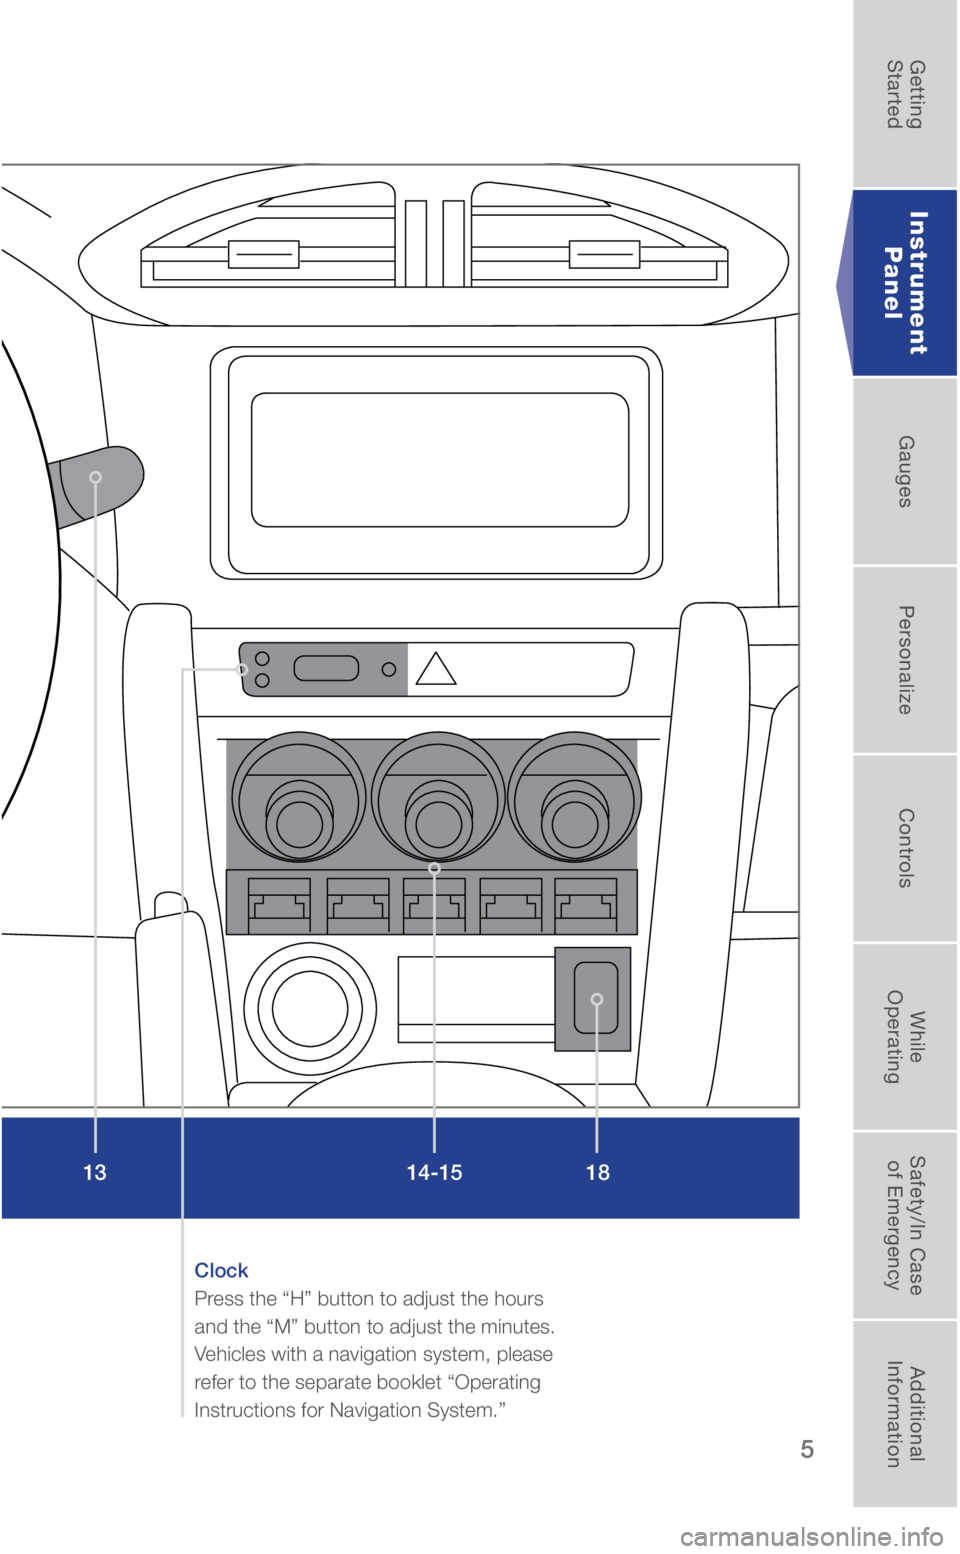 SUBARU BRZ 2019  Quick Guide 5
Clock 
Press the “H” button to adjust the hours 
and the “M” button to adjust the minutes. 
Vehicles with a navigation system, please 
refer to the separate booklet “Operating 
Instruction